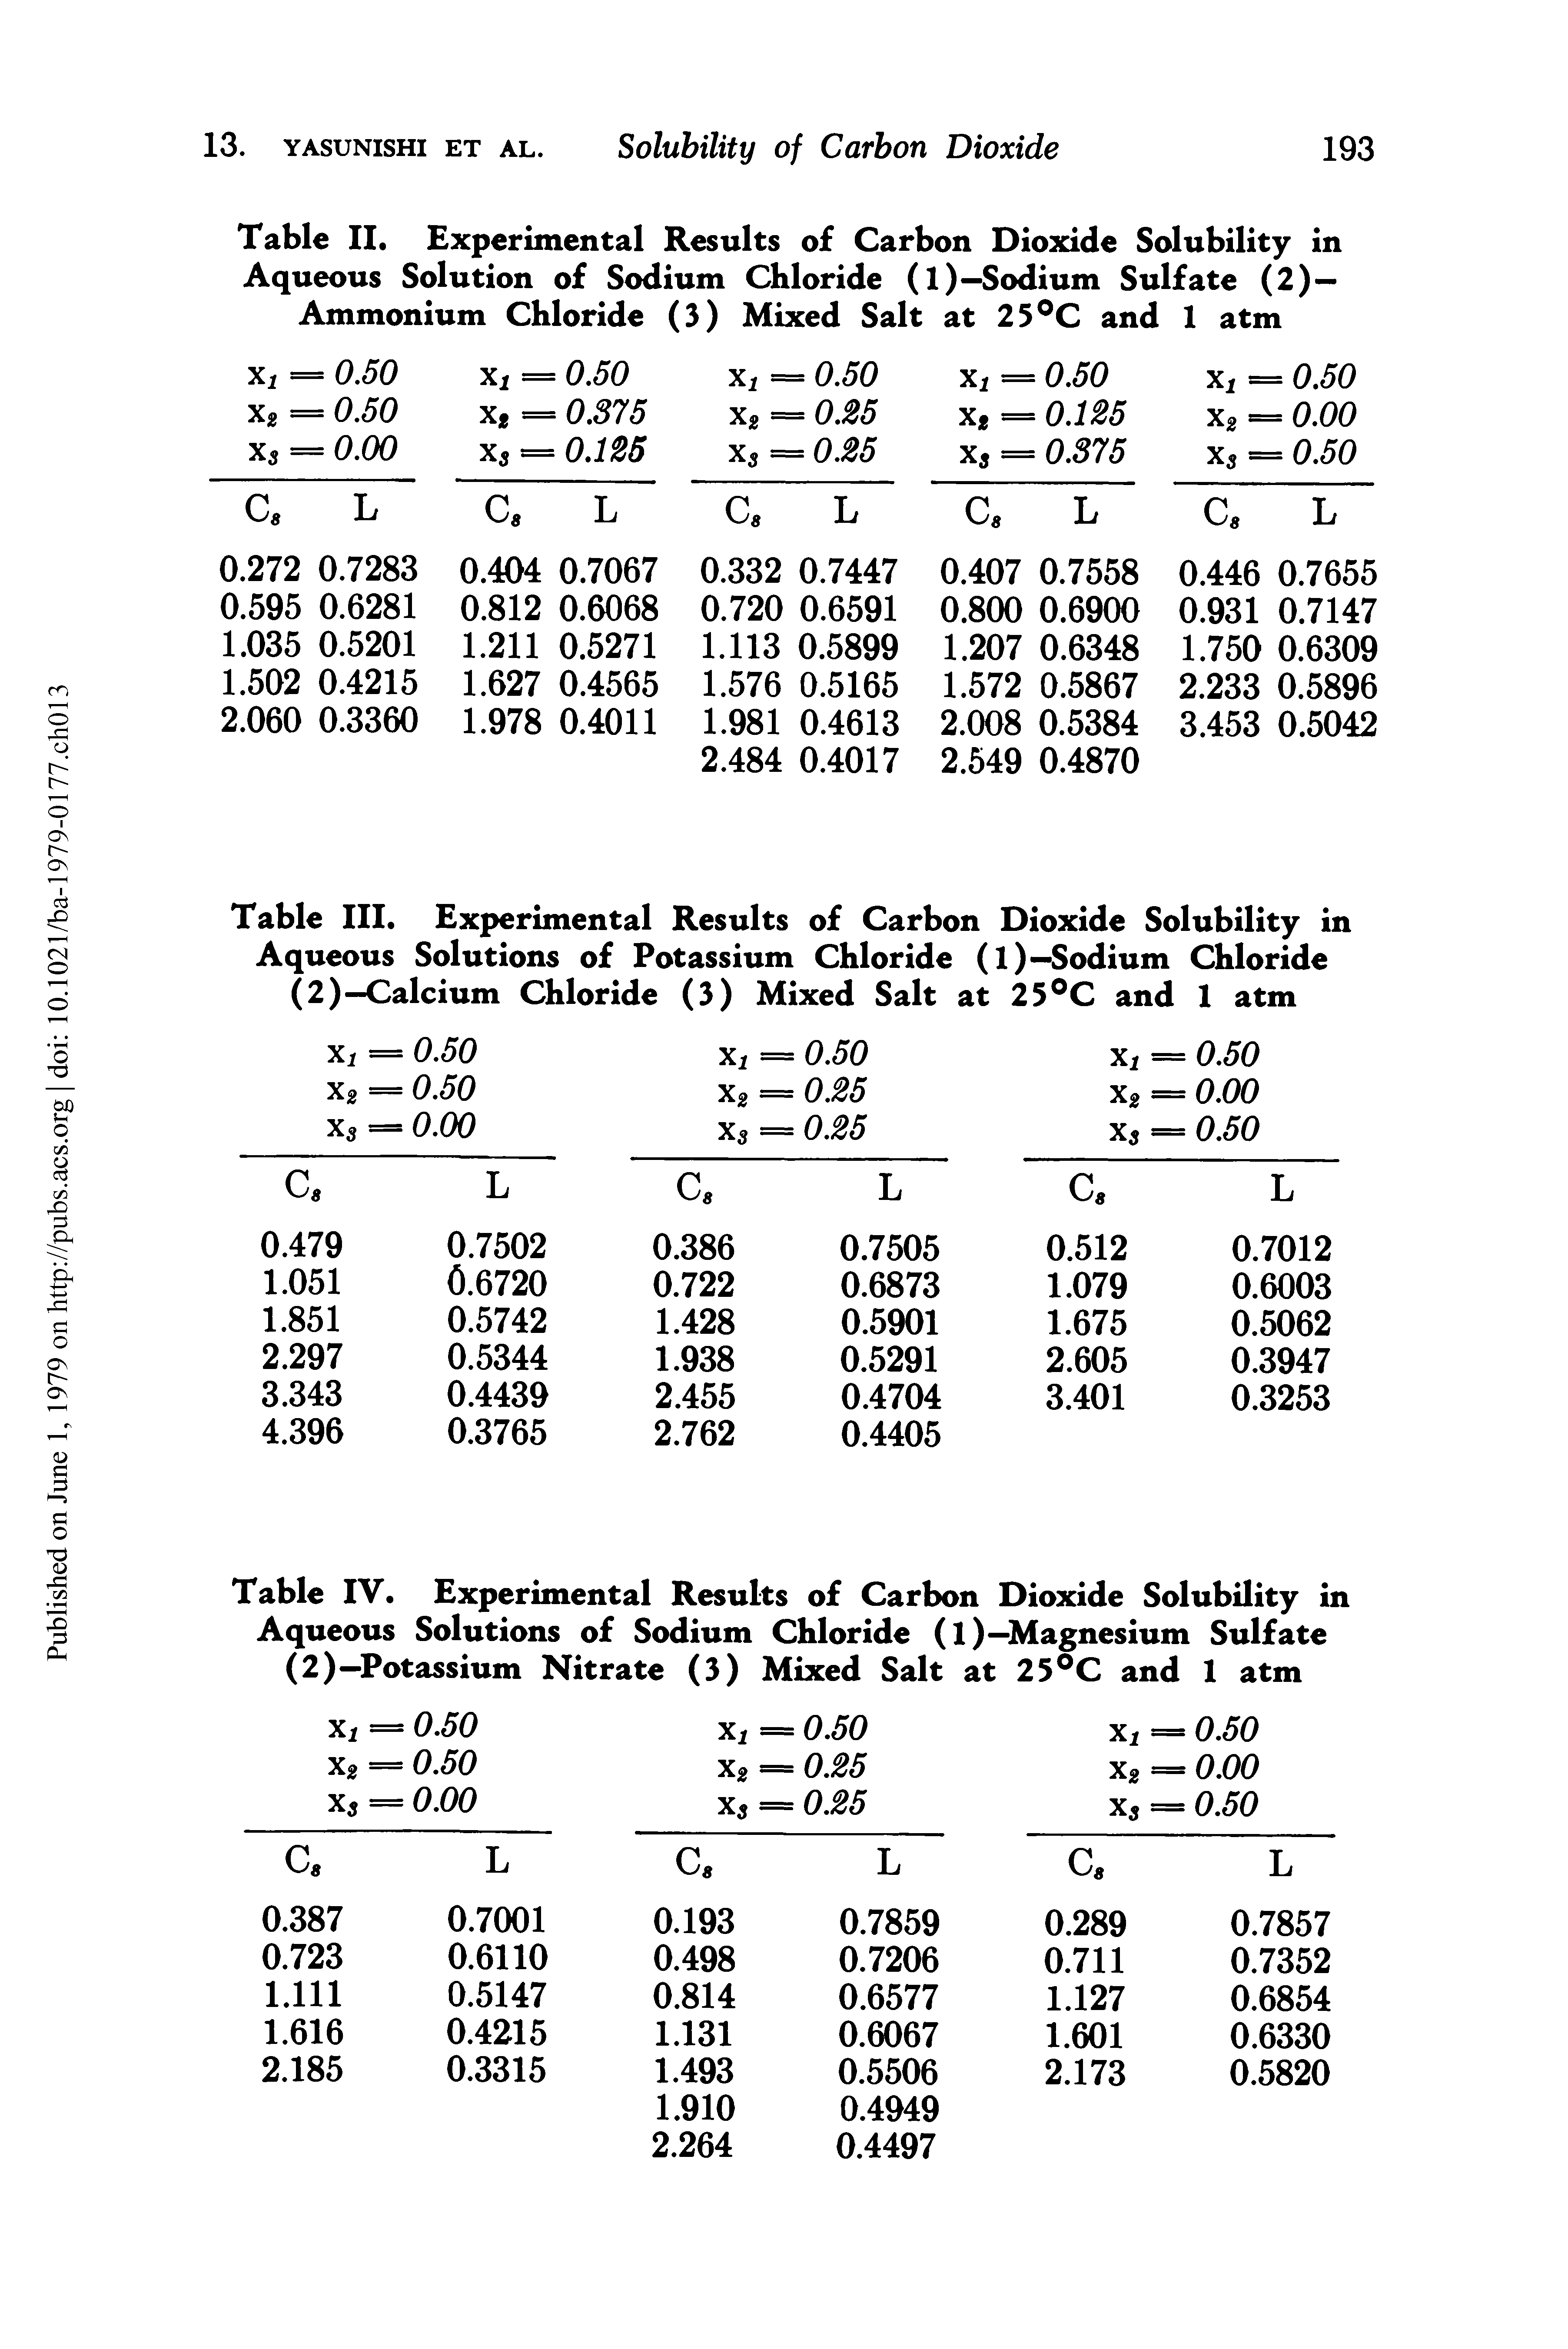 Table III. Experimental Results of Carbon Dioxide Solubility in Aqueous Solutions of Potassium Chloride (1)—Sodium Chloride (2)—Calcium Chloride (3) Mixed Salt at 25°C and 1 atm...